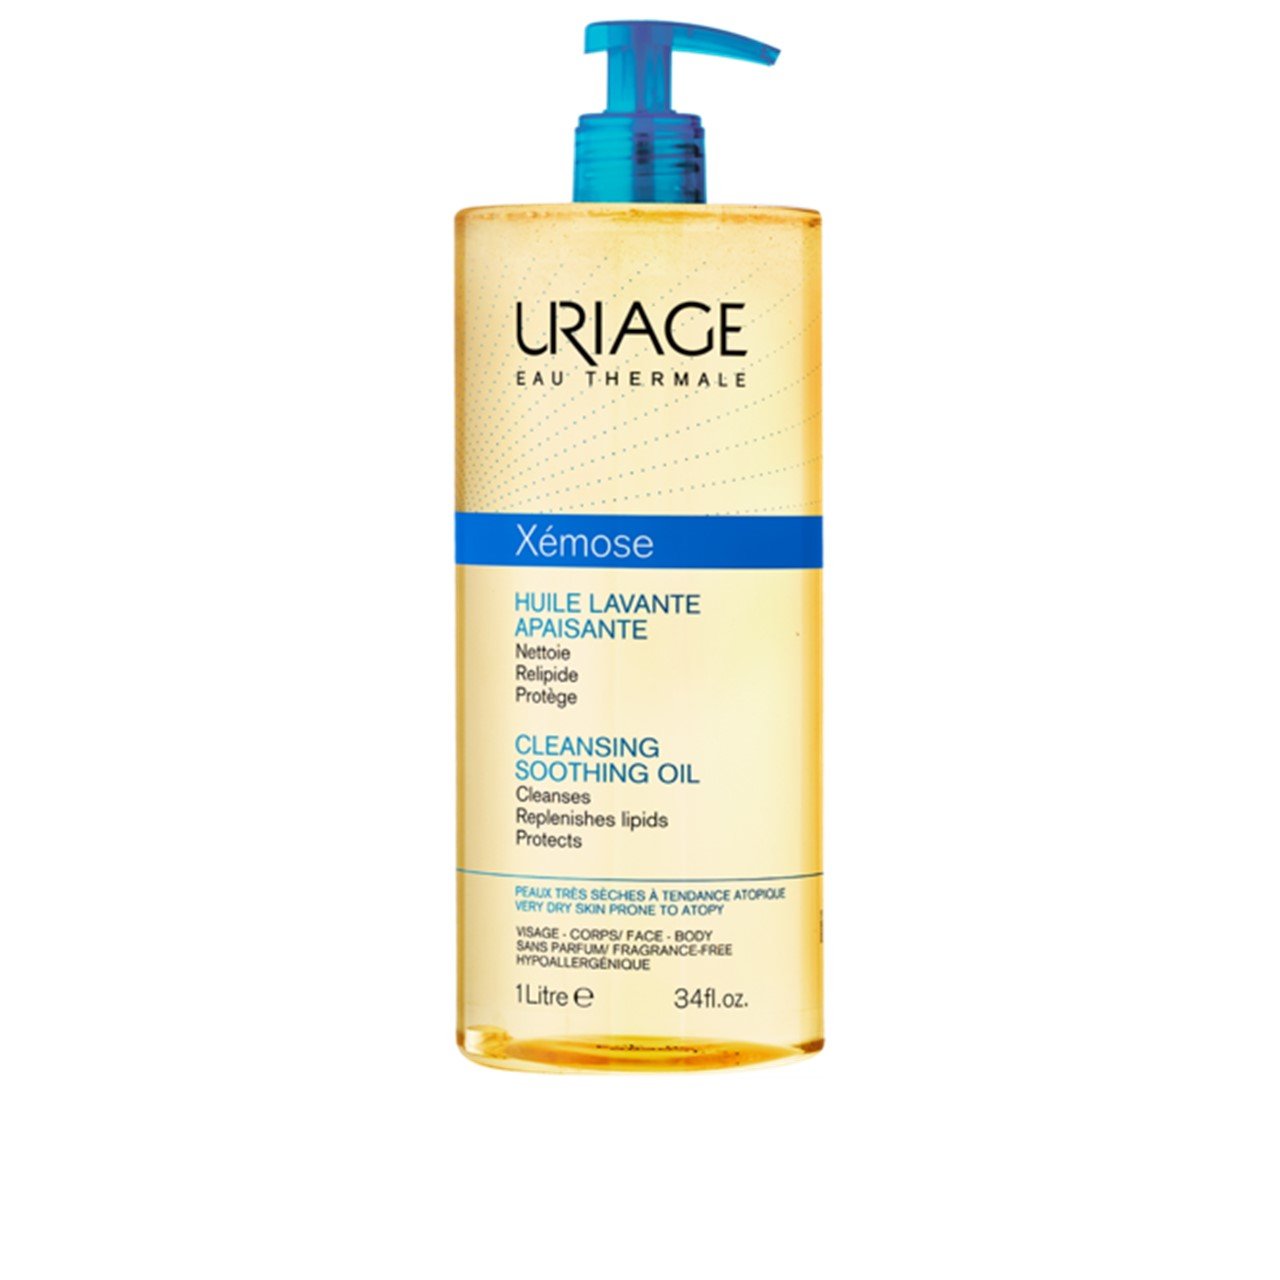 Uriage Xémose Cleansing Soothing Oil 1L (33.81fl oz)